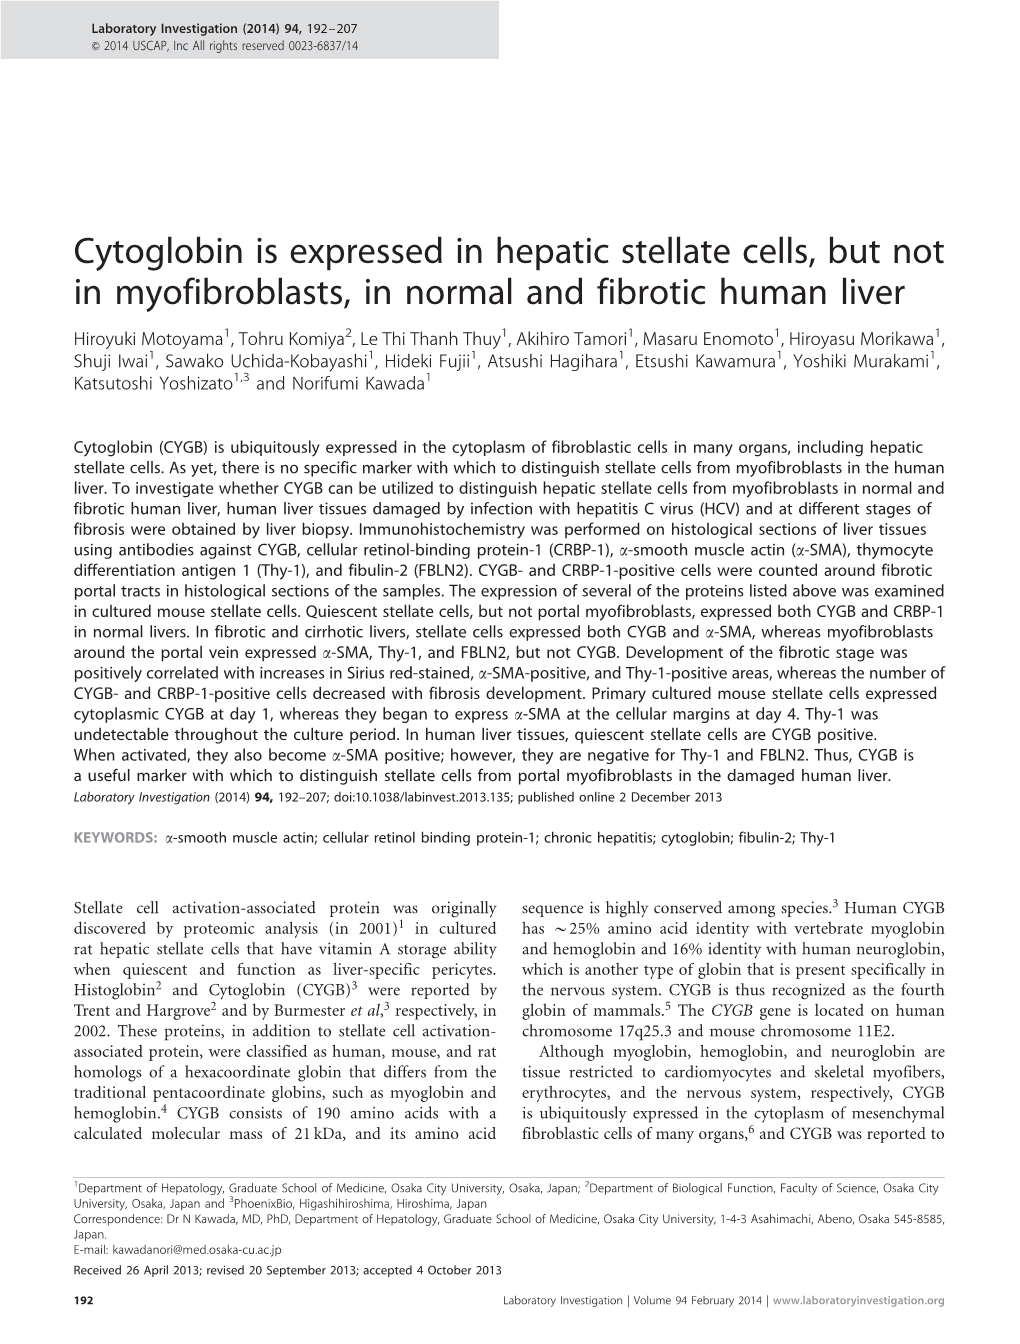 Cytoglobin Is Expressed in Hepatic Stellate Cells, but Not In